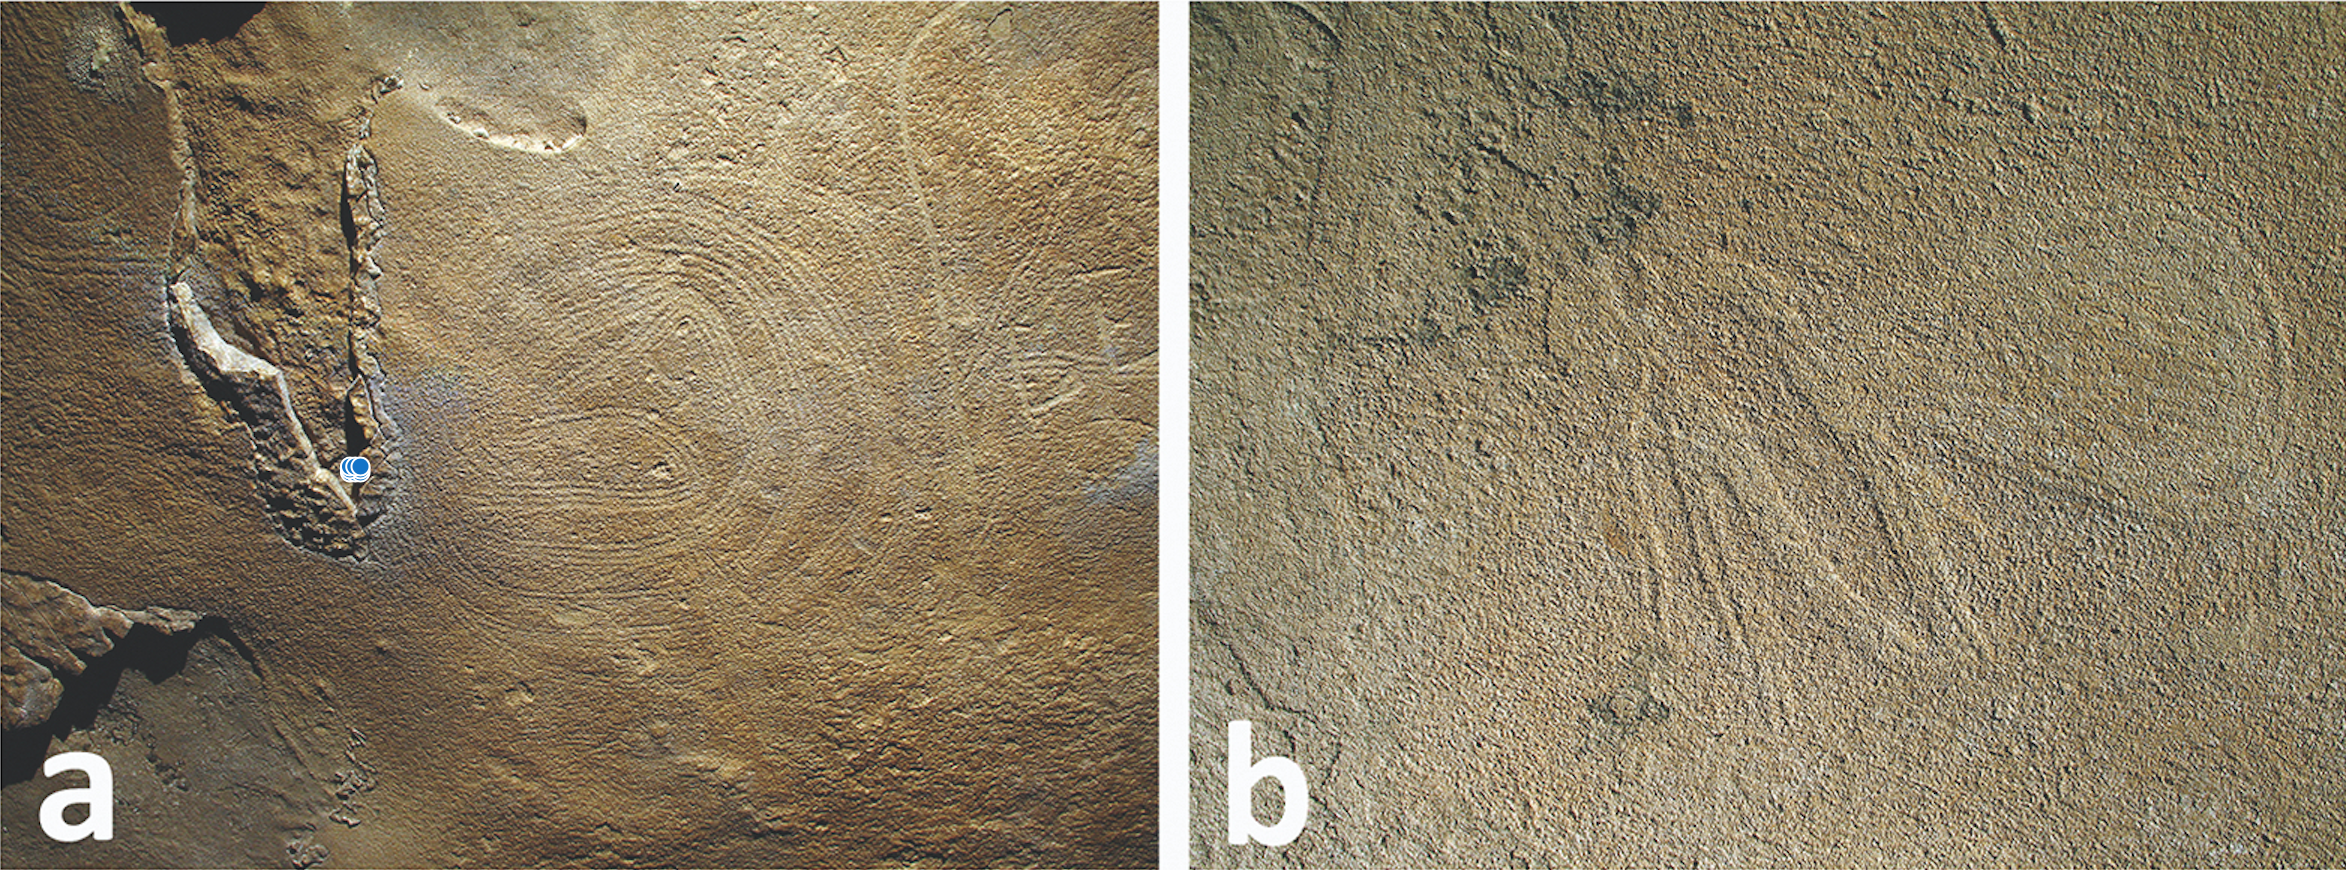 Small mud glyphs of a coiled serpent (left) and wasp (right) in the cave. (Photo: A. Cressler)